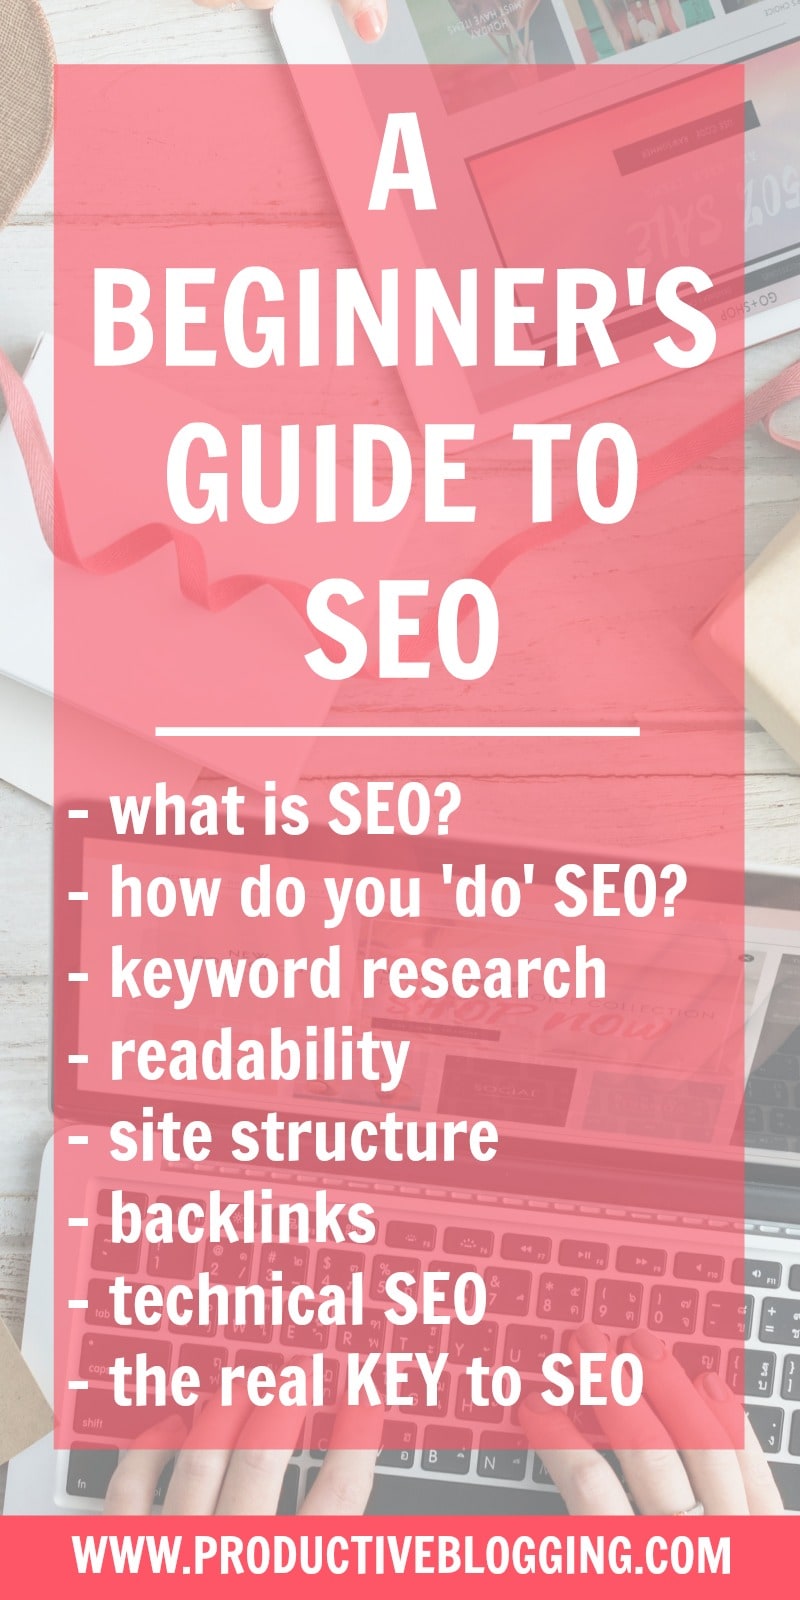 Do you find SEO confusing and complicated? Do you wish you understood more about SEO and how it works? Then you NEED to read my beginner’s guide to SEO! #SEO #SEOforbeginners #beginnersSEO #yoast #yoastseo #yoastplugin #searchengineoptimization #keywords #growyourblog #bloggrowth #bloggrowthhacks #SEOtips #bloggingtips #productiveblogging #blogsmarter #blogsmarternotharder #BSNH